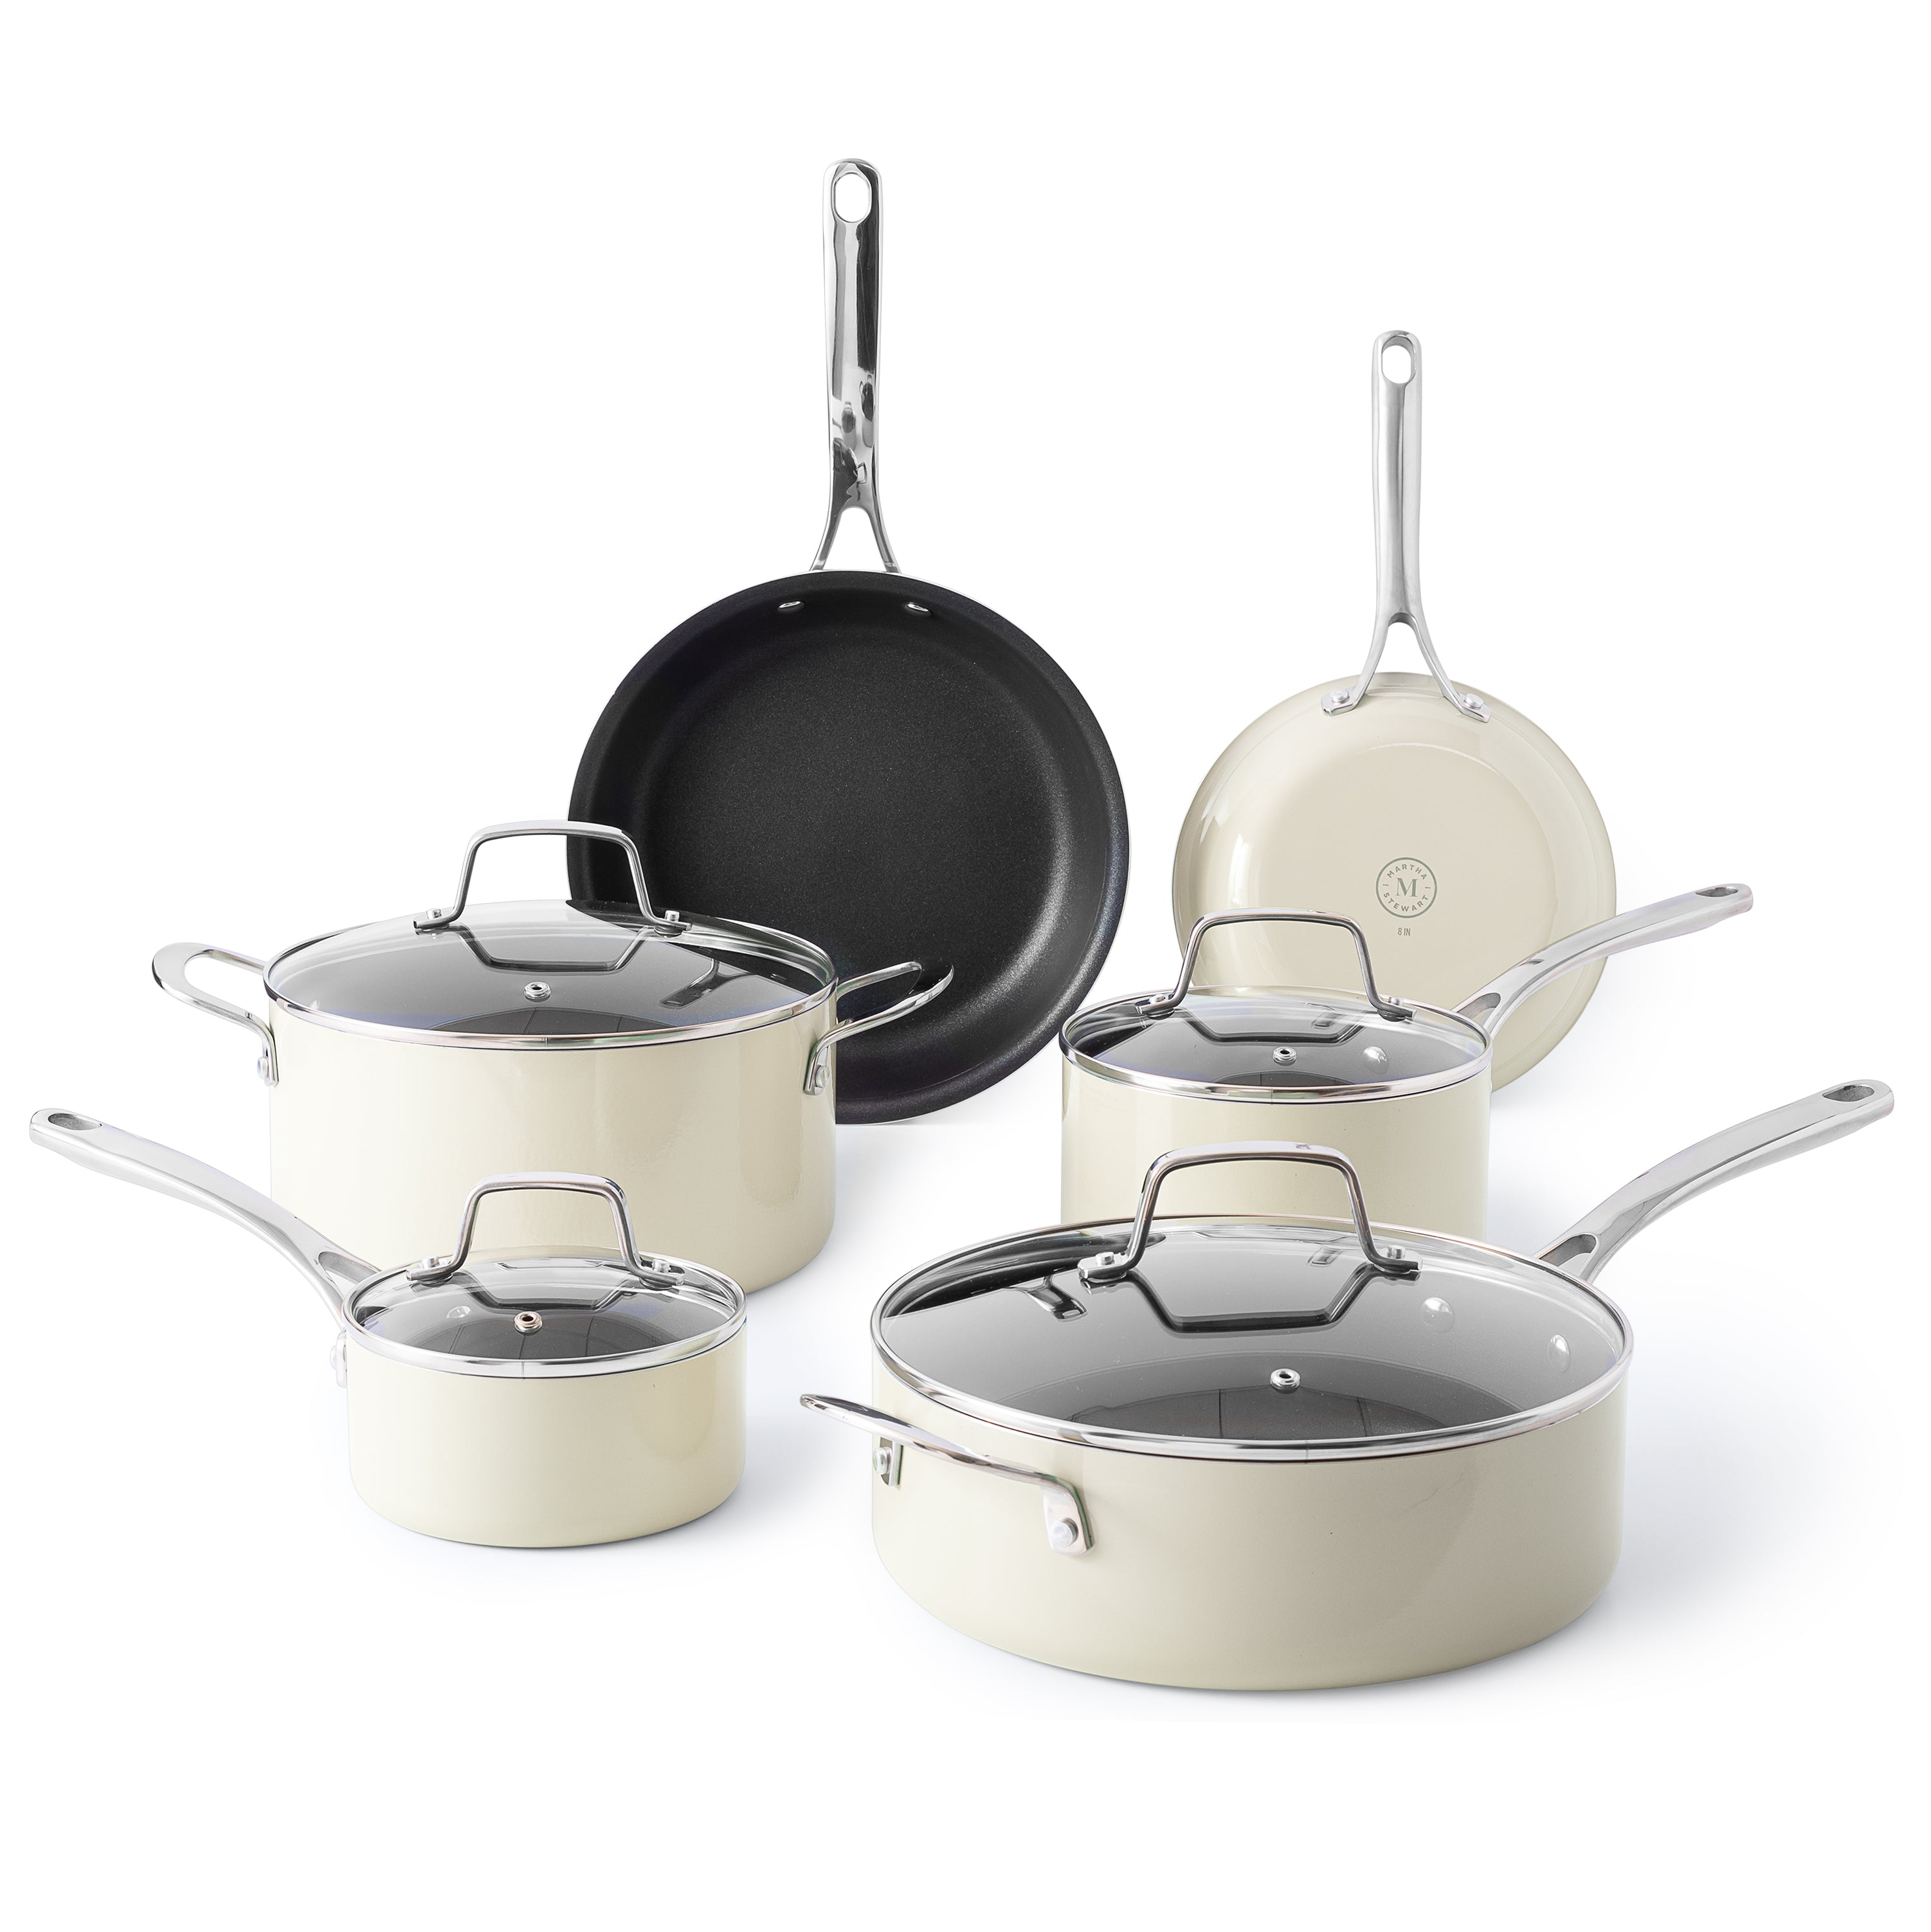 Martha by Martha Stewart Cookware Launches at SurLaTable.com